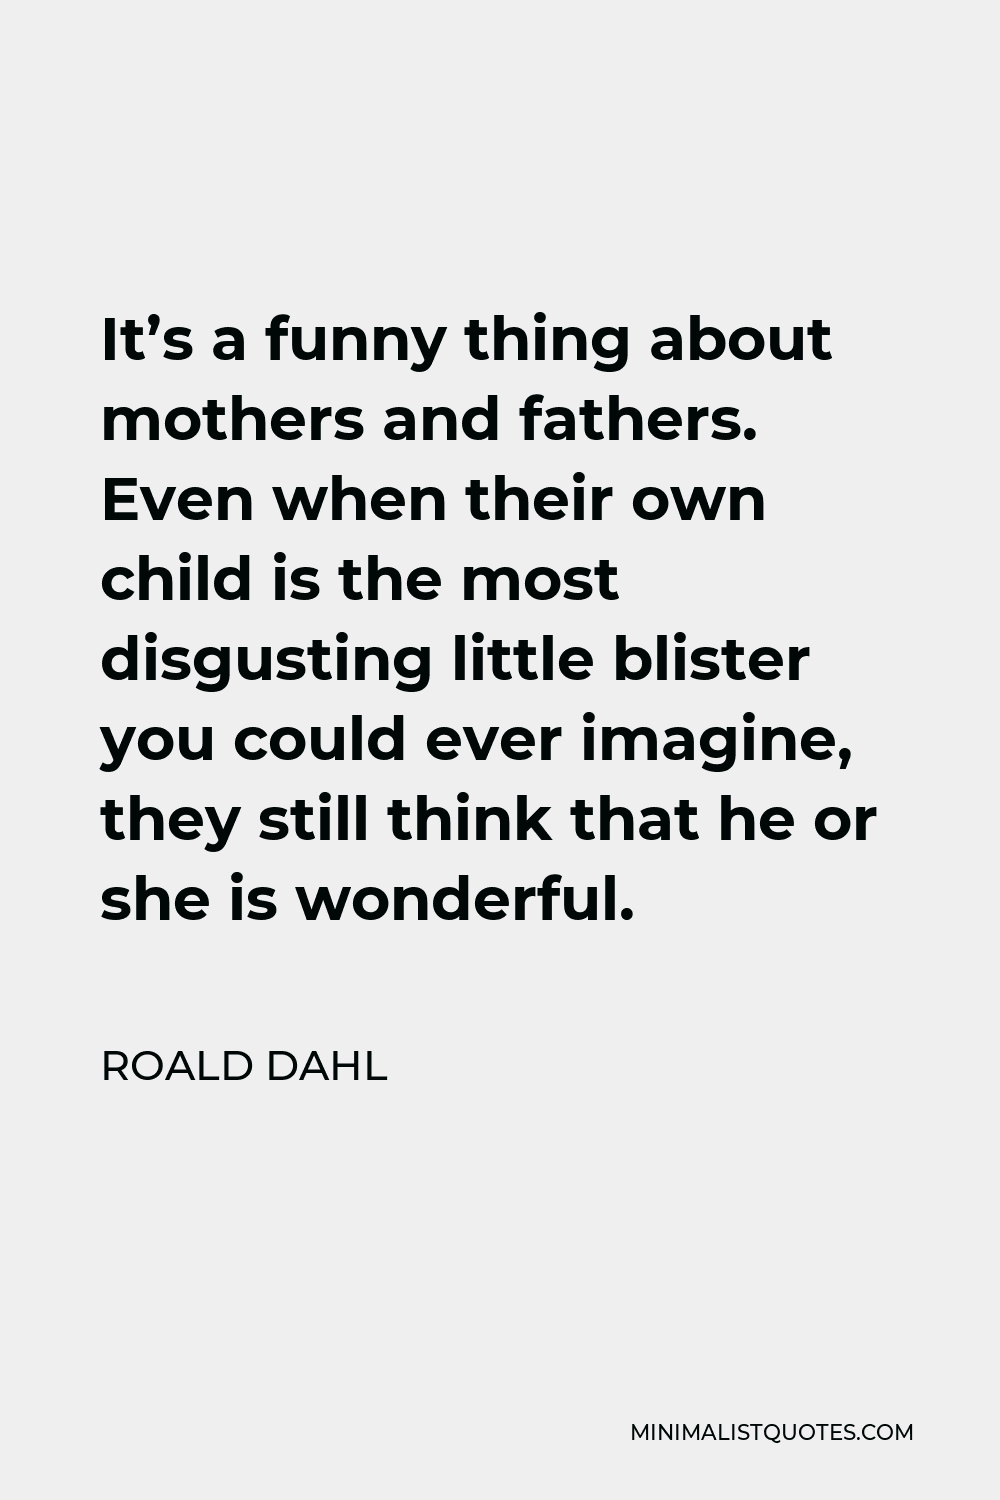 Roald Dahl Quote: It's a funny thing about mothers and fathers. Even when  their own child is the most disgusting little blister you could ever  imagine, they still think that he or